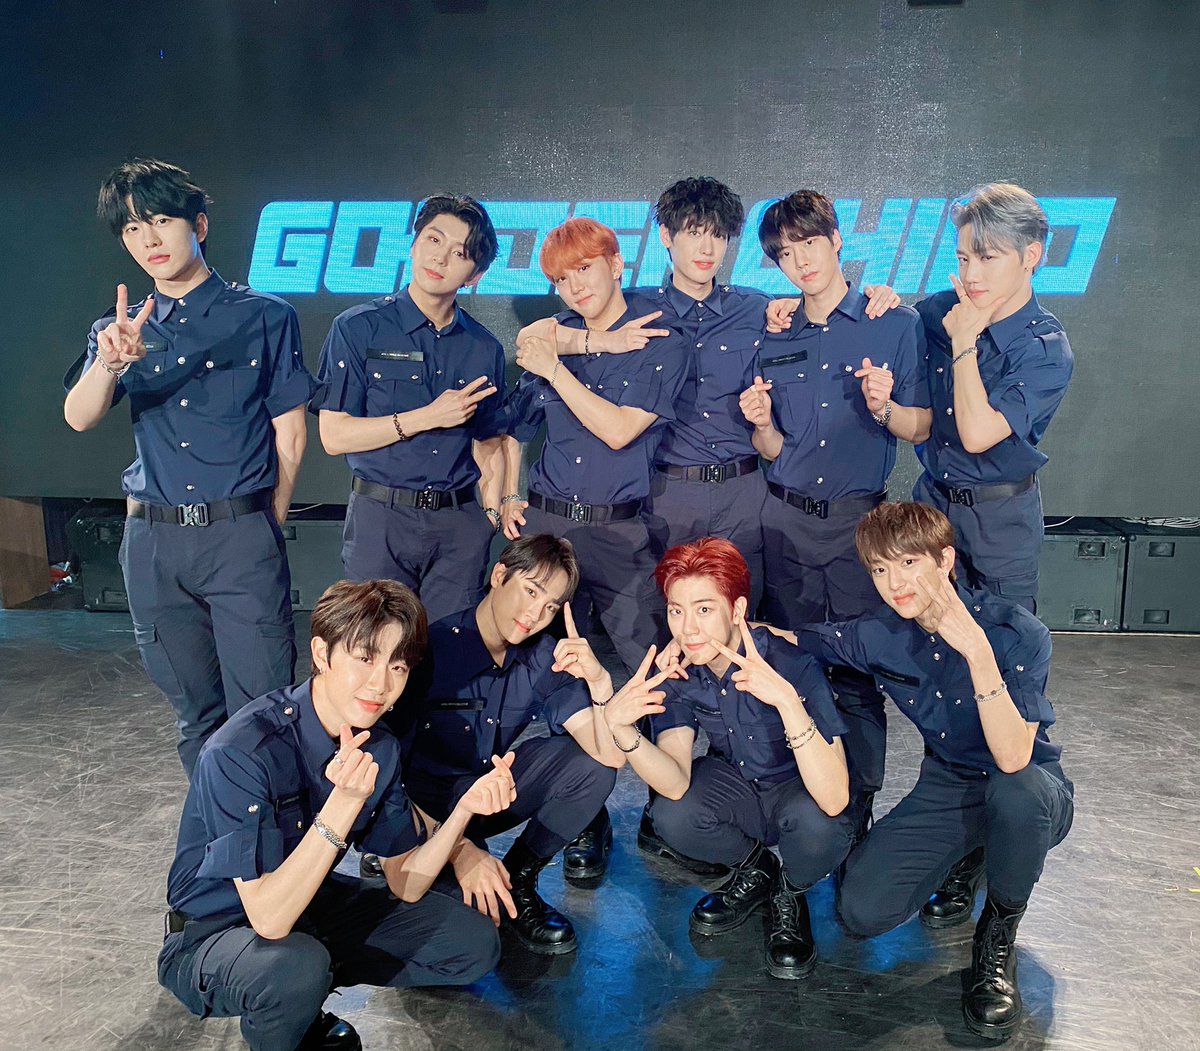 golden child ONE(Lucid Dream) era all outfits they wore, a thread;